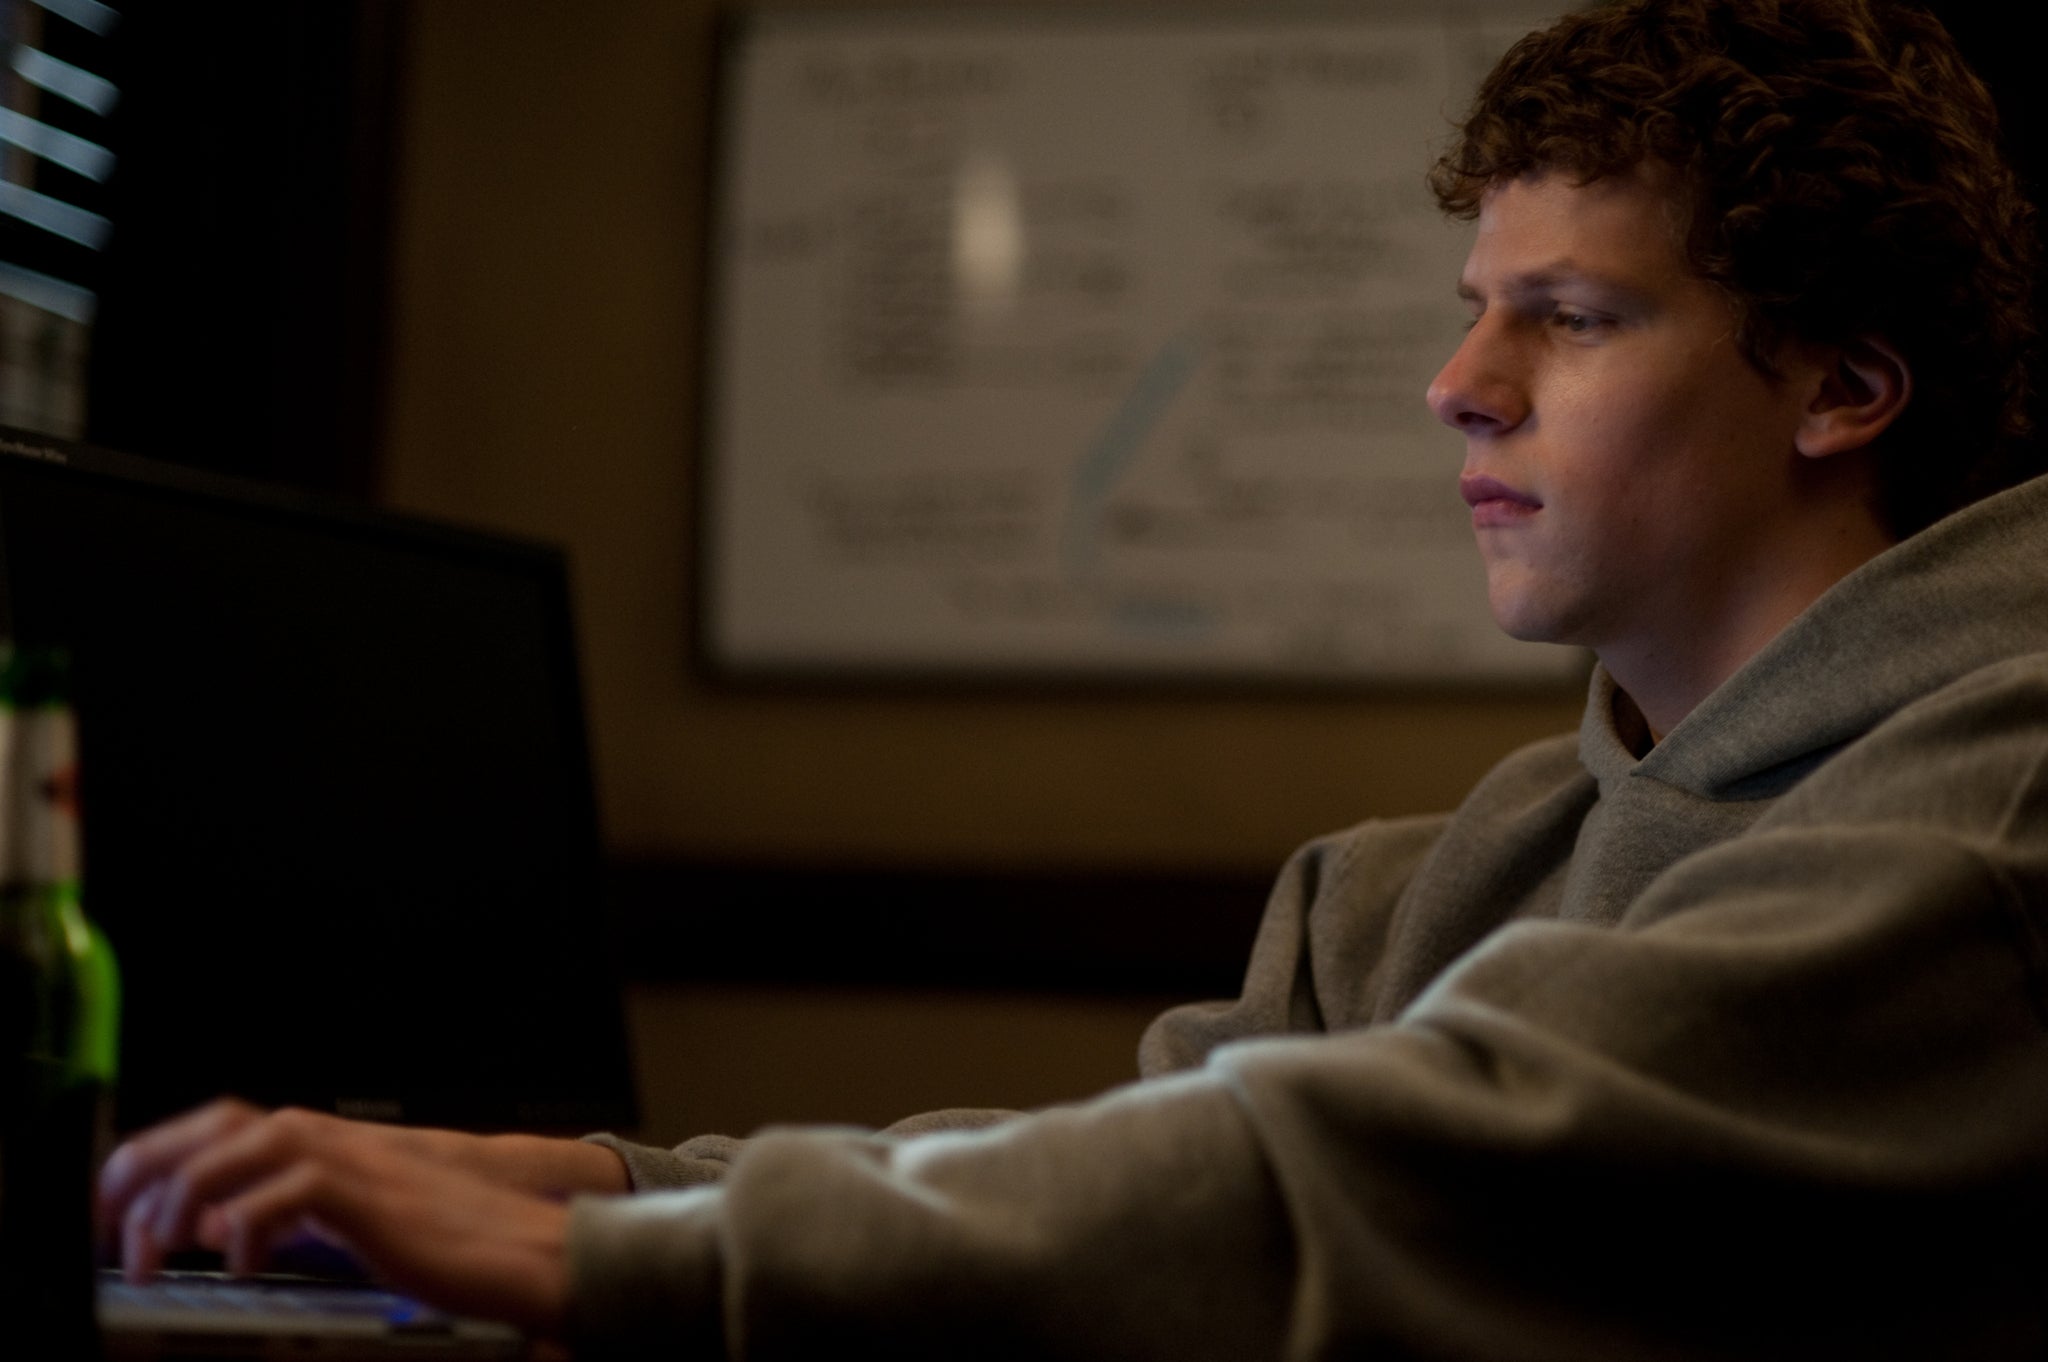 Jesse Eisenberg portrays a young Mark Zuckerberg in his college dorm room in a plain grey sweatshirt while he types on his laptop. 